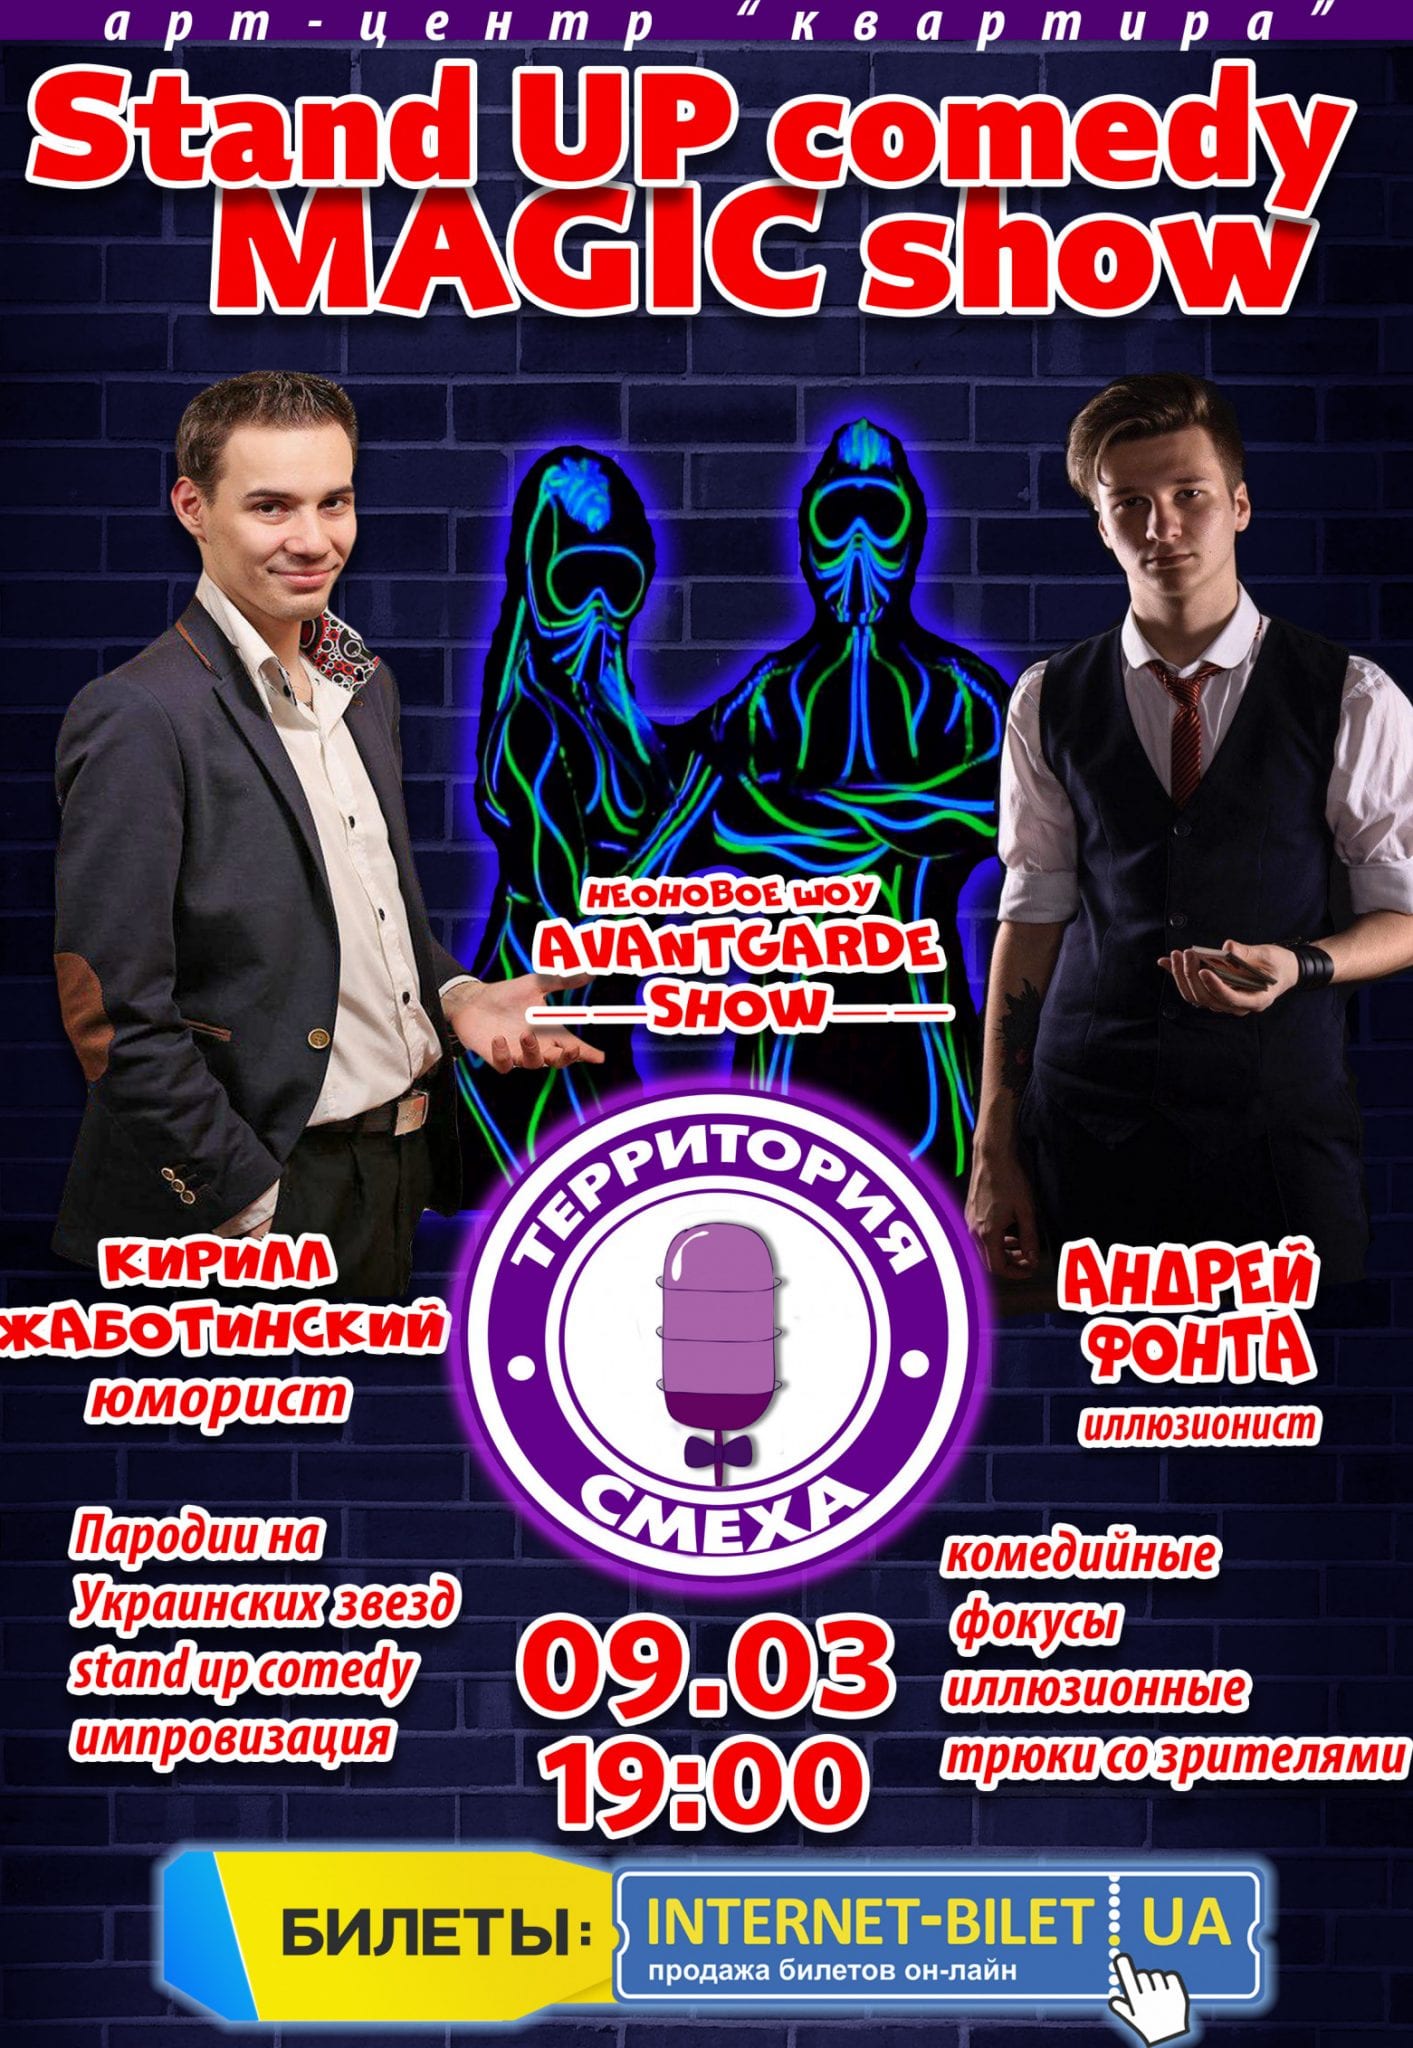 Stand Up Comedy magic show Днепр, 09.03.2020, цена, расписание. Афиша Днепра